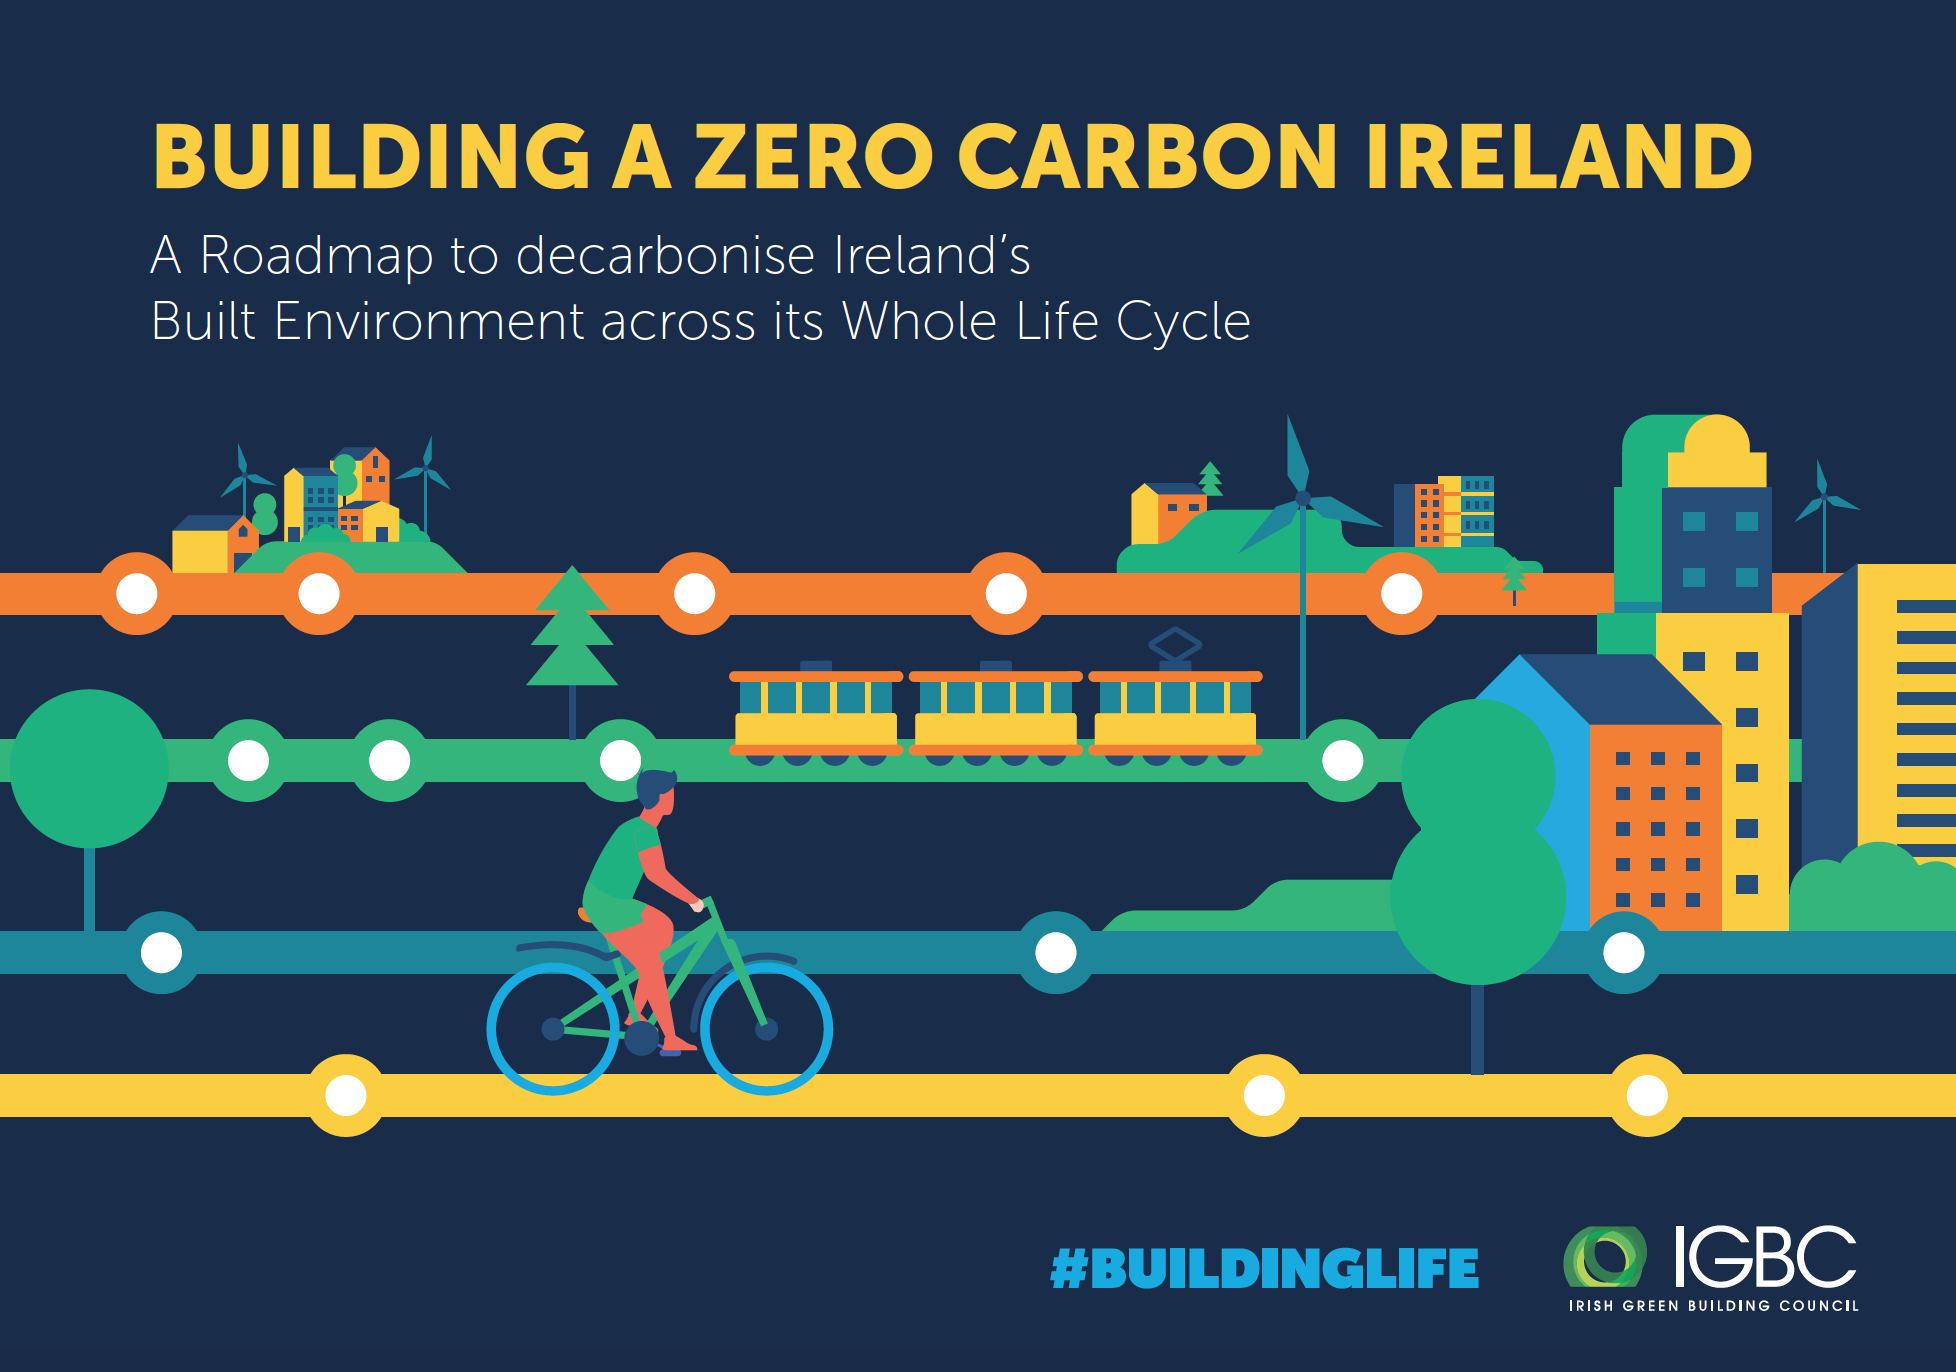 #BuildingLife – Moving Irish construction to a zero-carbon footing